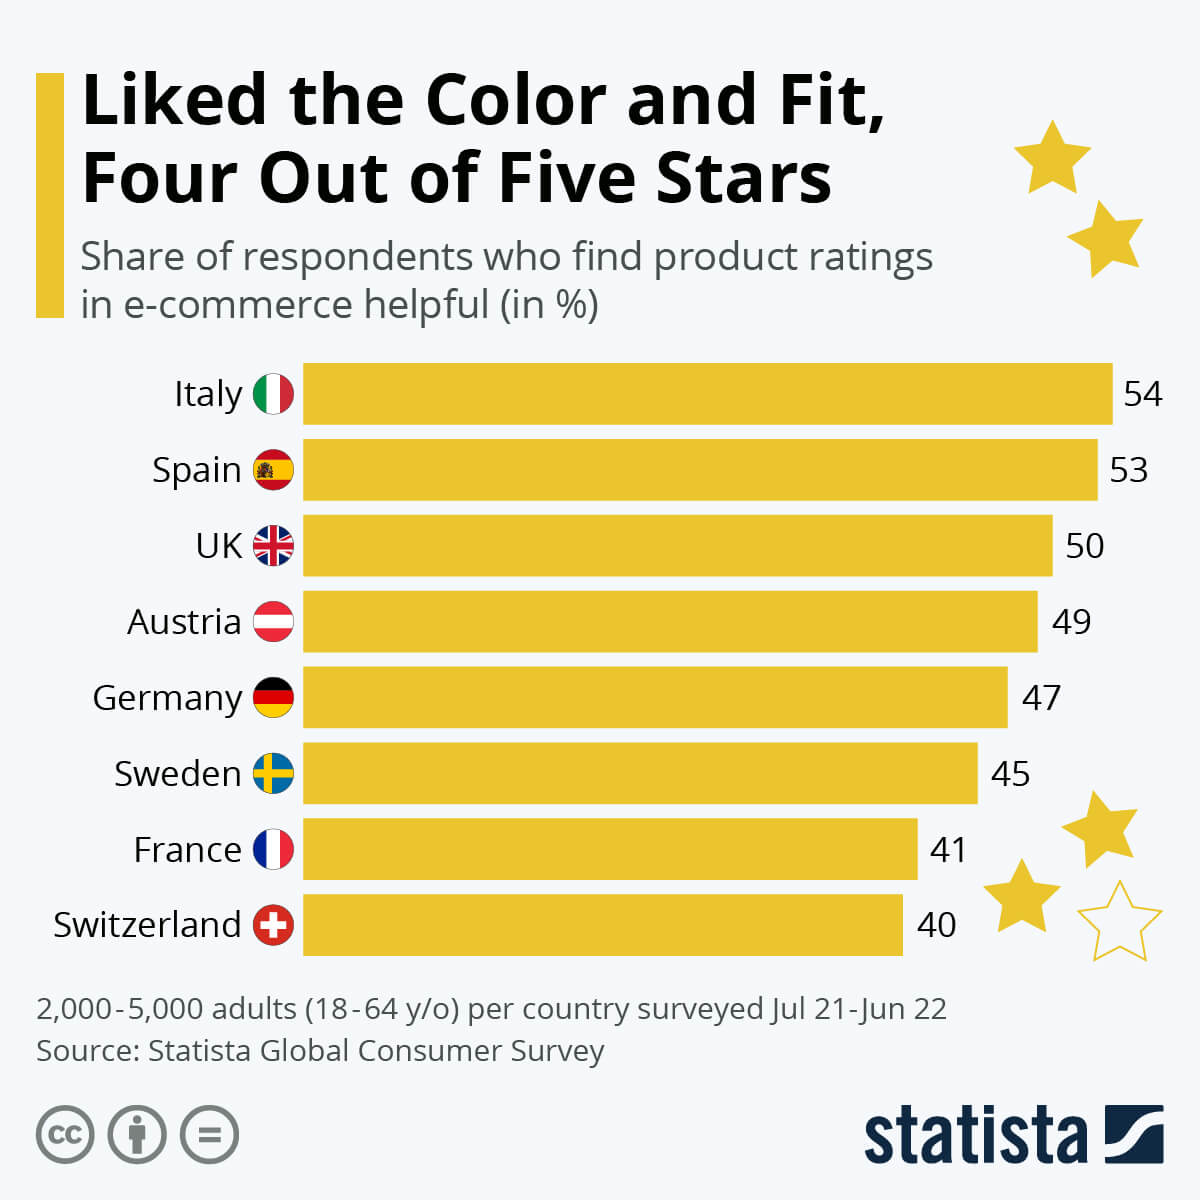 statista global consumer survey results on product ratings